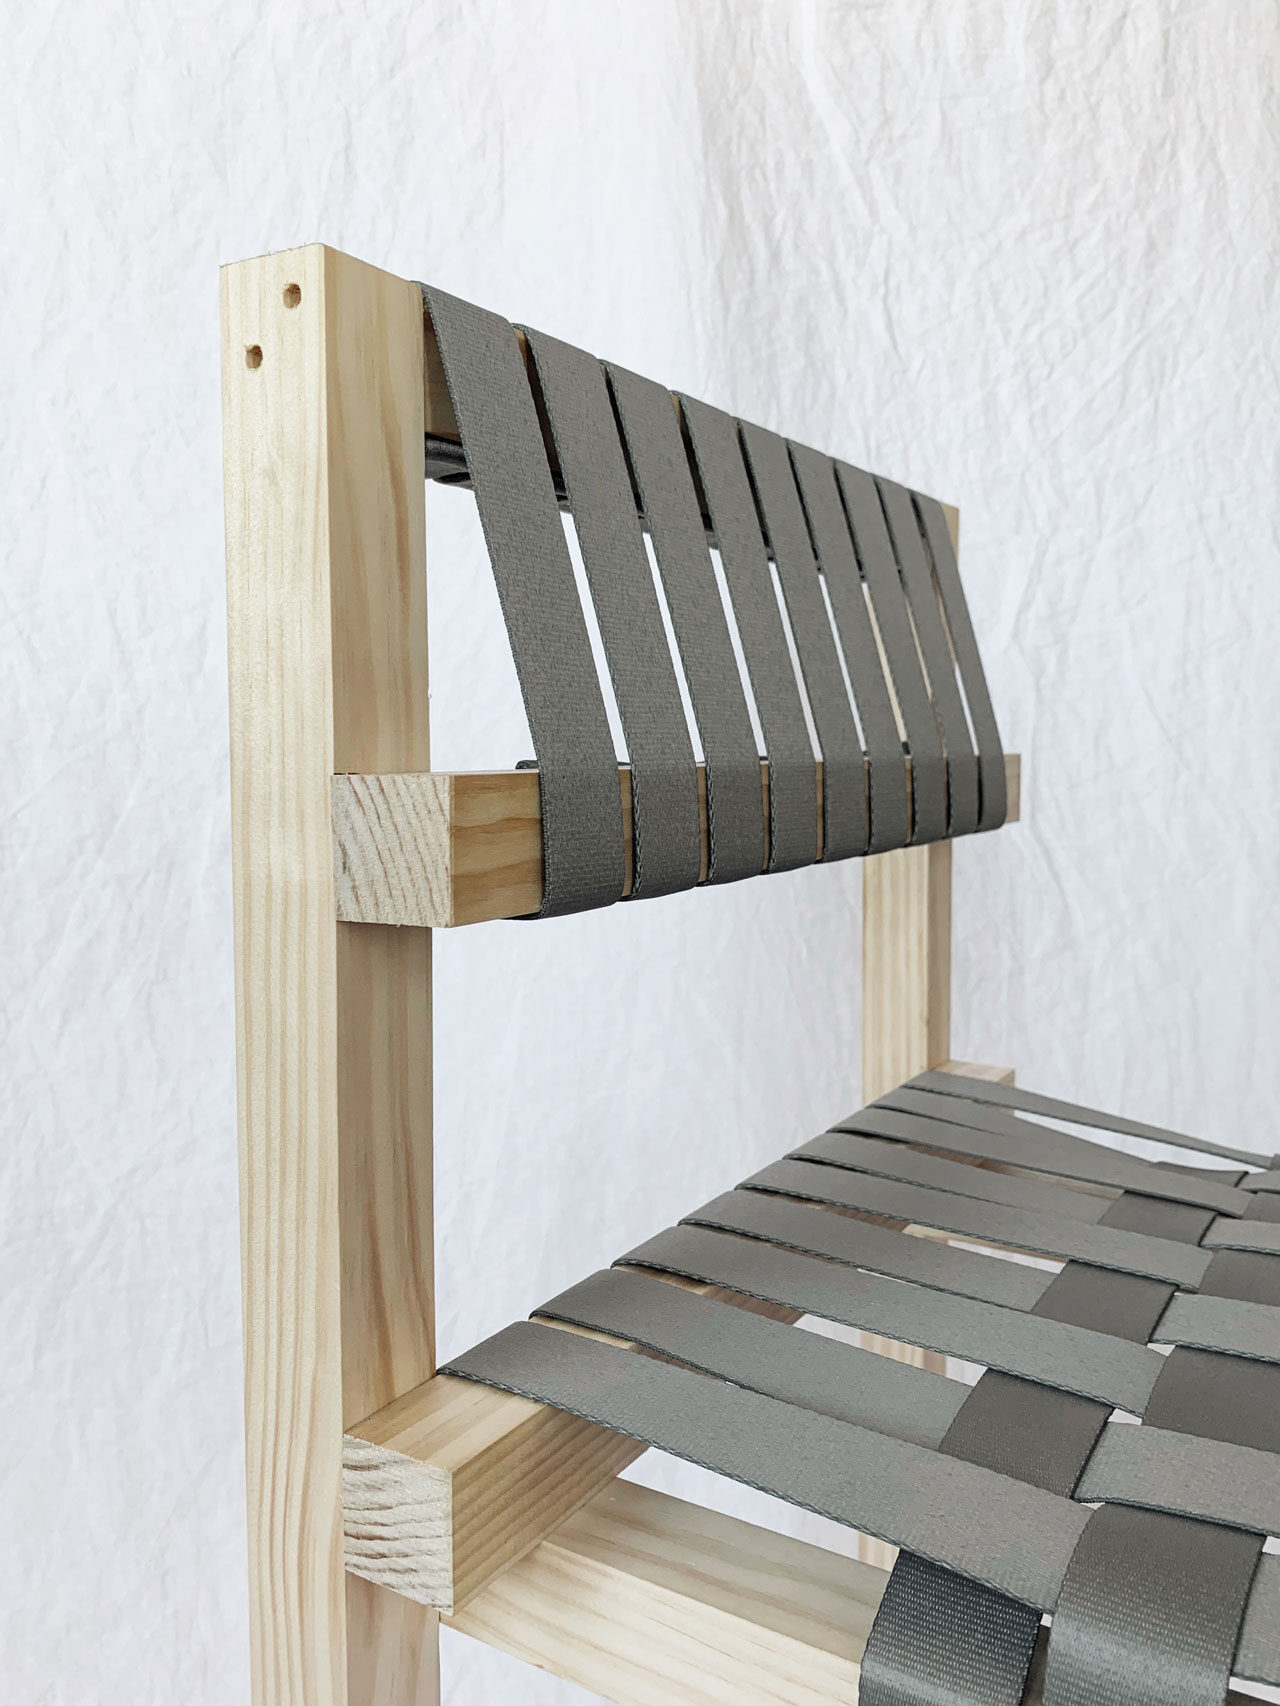 Two by Two DIY Chair by Ian Anderson